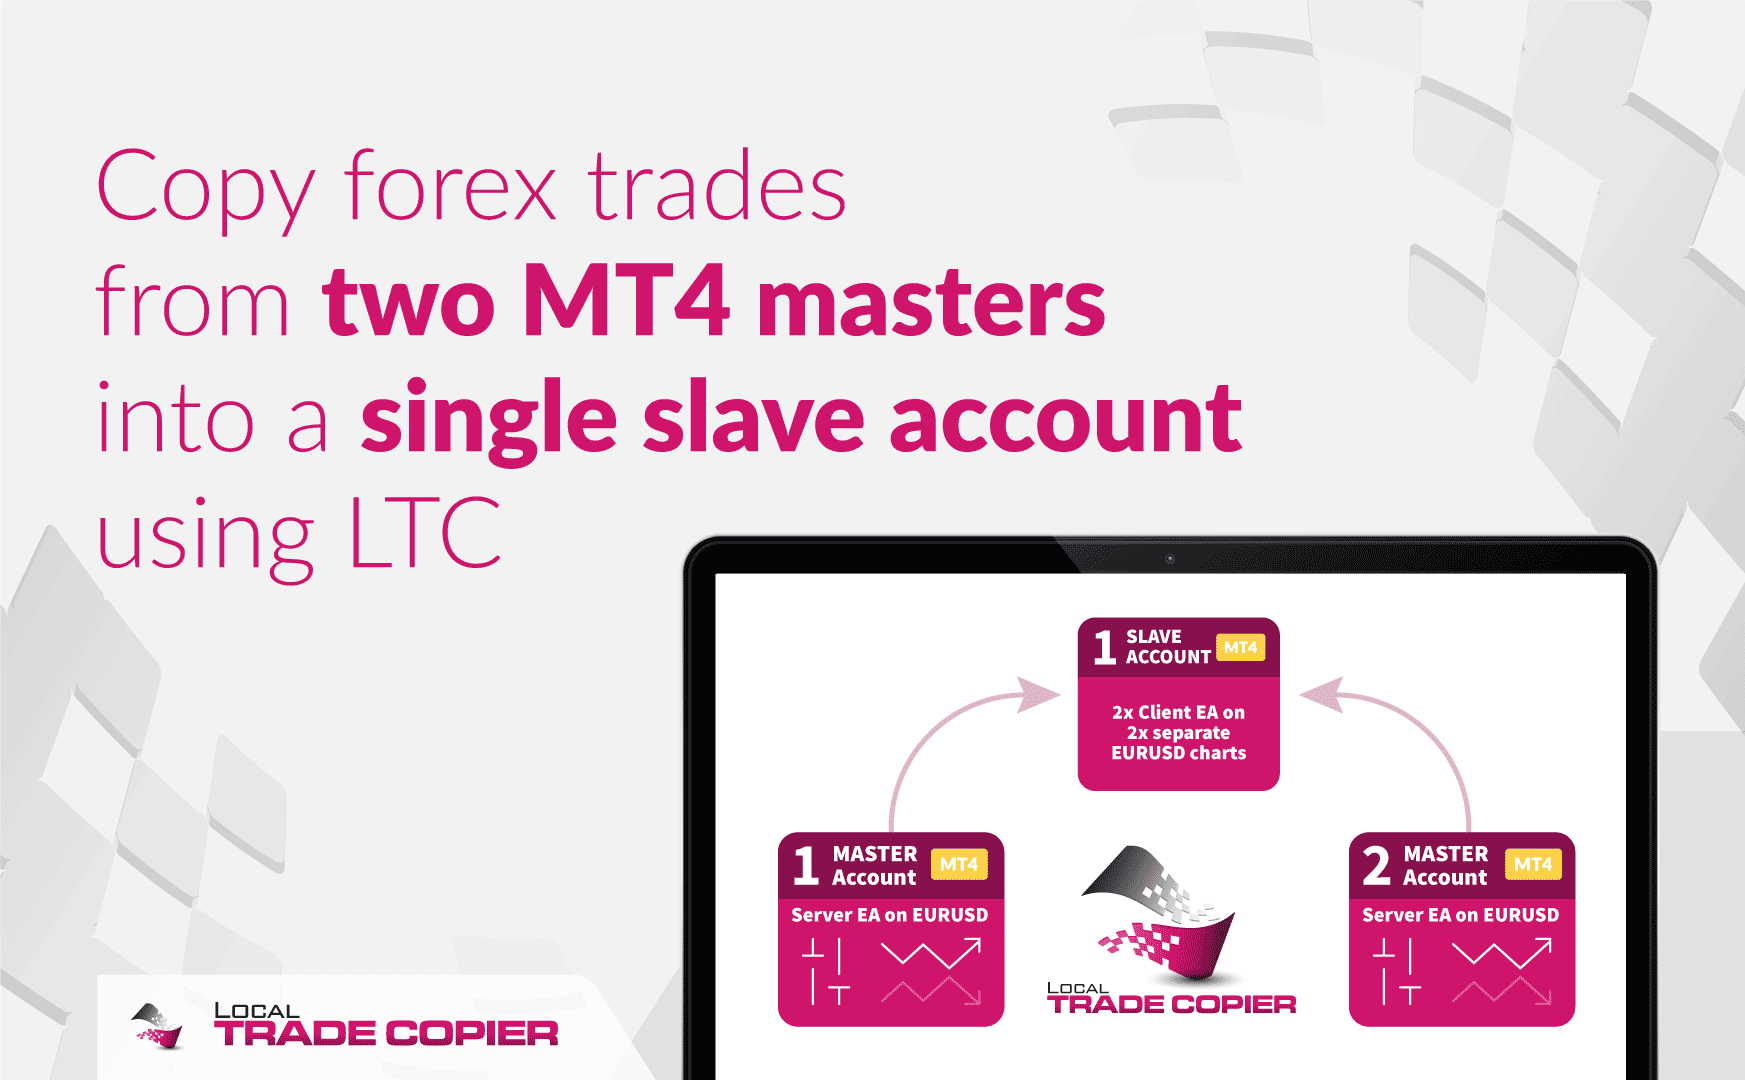 Local-Trade-Copier-Tutorials-opy-forex-trades-from-two-mt4-masters-into-single-slave-account-1745x1080